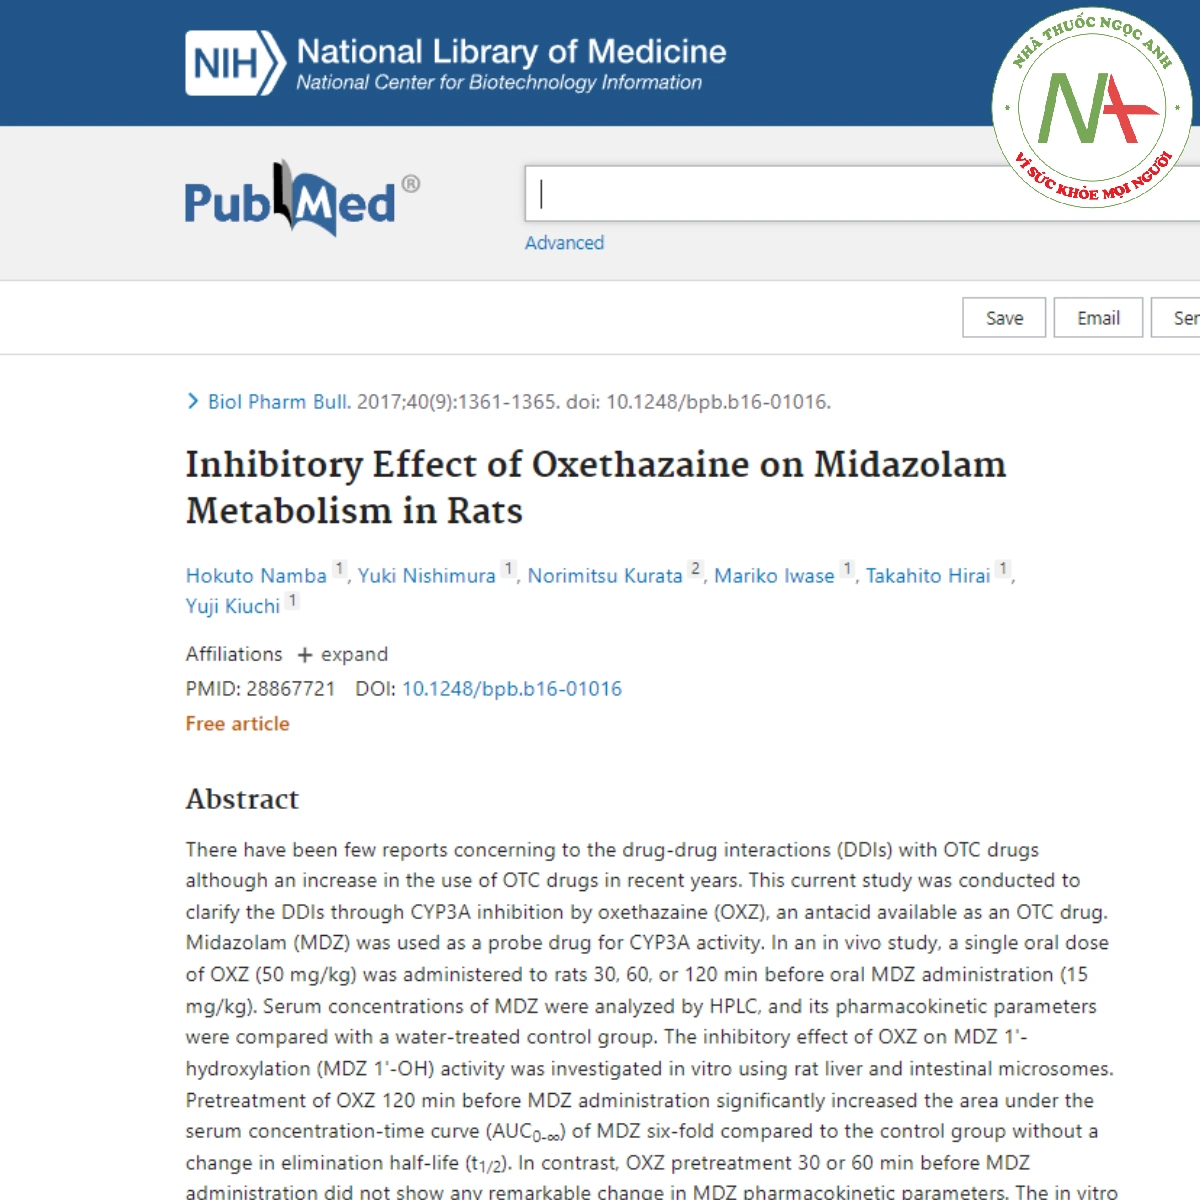 Inhibitory Effect of Oxethazaine on Midazolam Metabolism in Rats